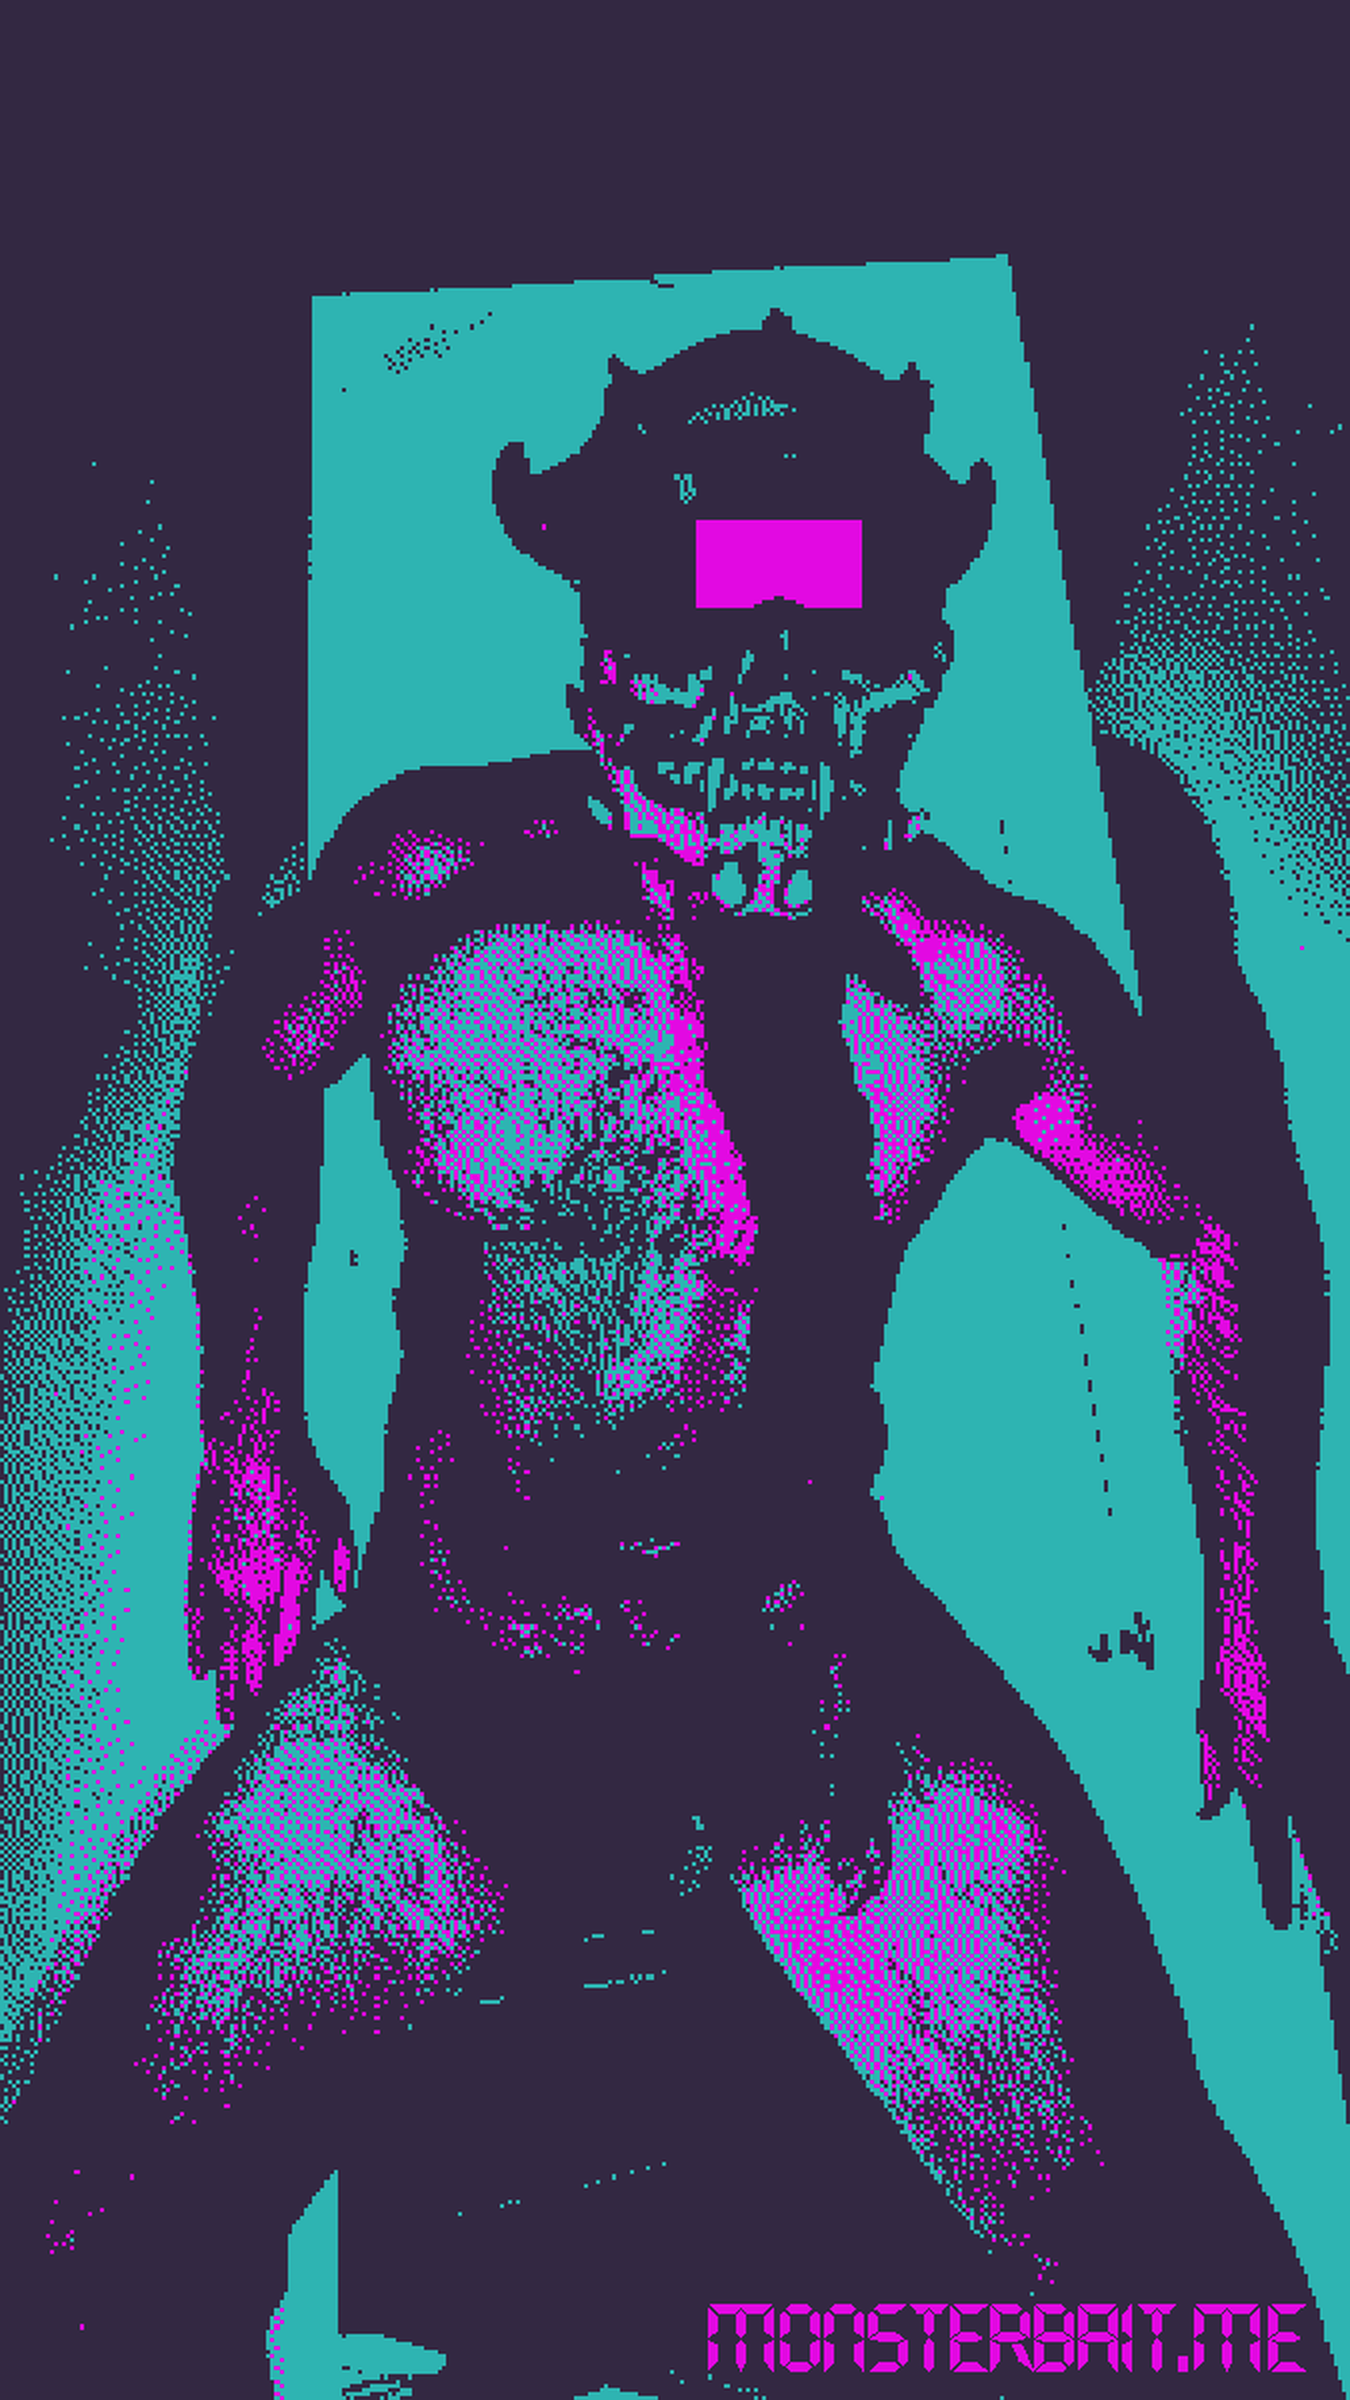 Photo by Monsterbait with the username @Monsterbait, who is a star user,  December 15, 2020 at 6:44 PM. The post is about the topic DemonSex and the text says 'Digital Demon Photosets up on our subscription page! 

Prints are available just send a DM'